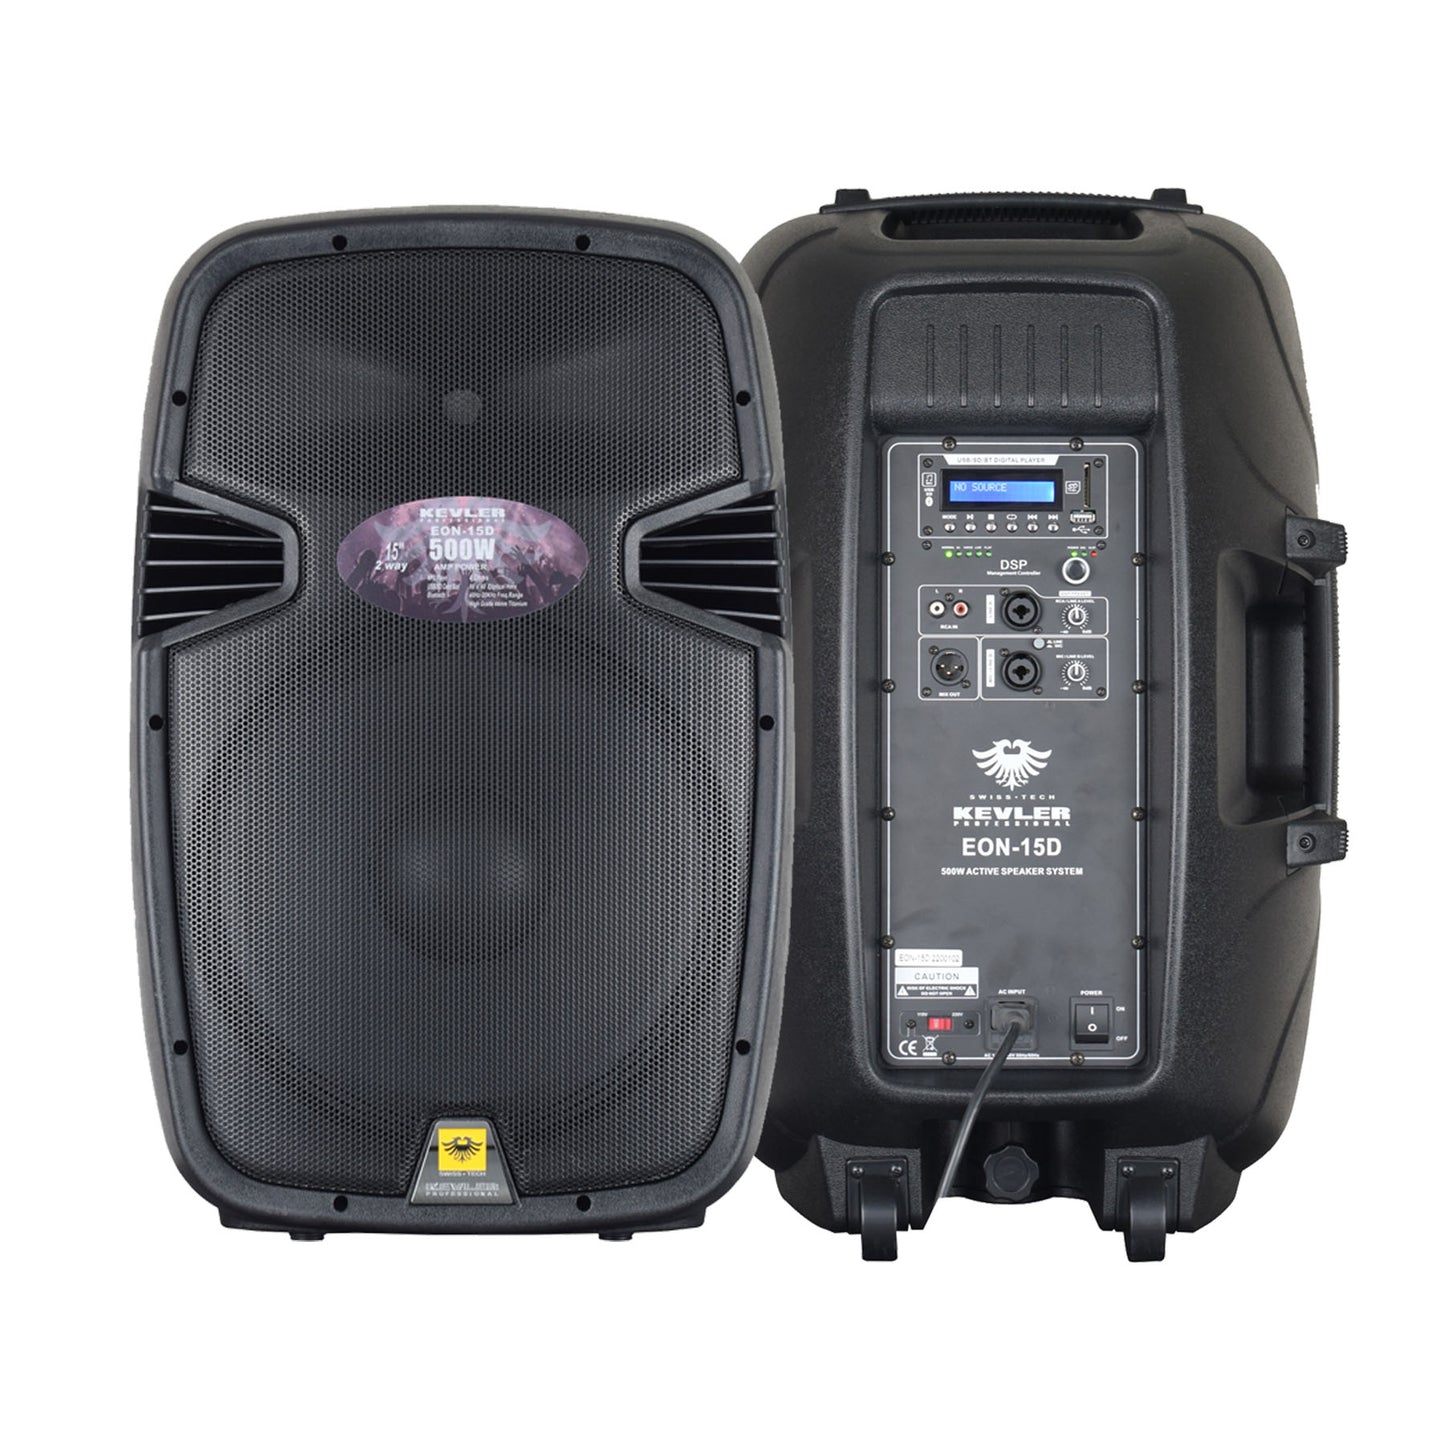 KEVLER EON-15D 15" 800W 2-way Full Range Active Loud Speaker with LCD Display and Class D Amplifier, Built-In USB Port / Bluetooth Function, XLR, RCA Line, Mic I/O and DSP Control